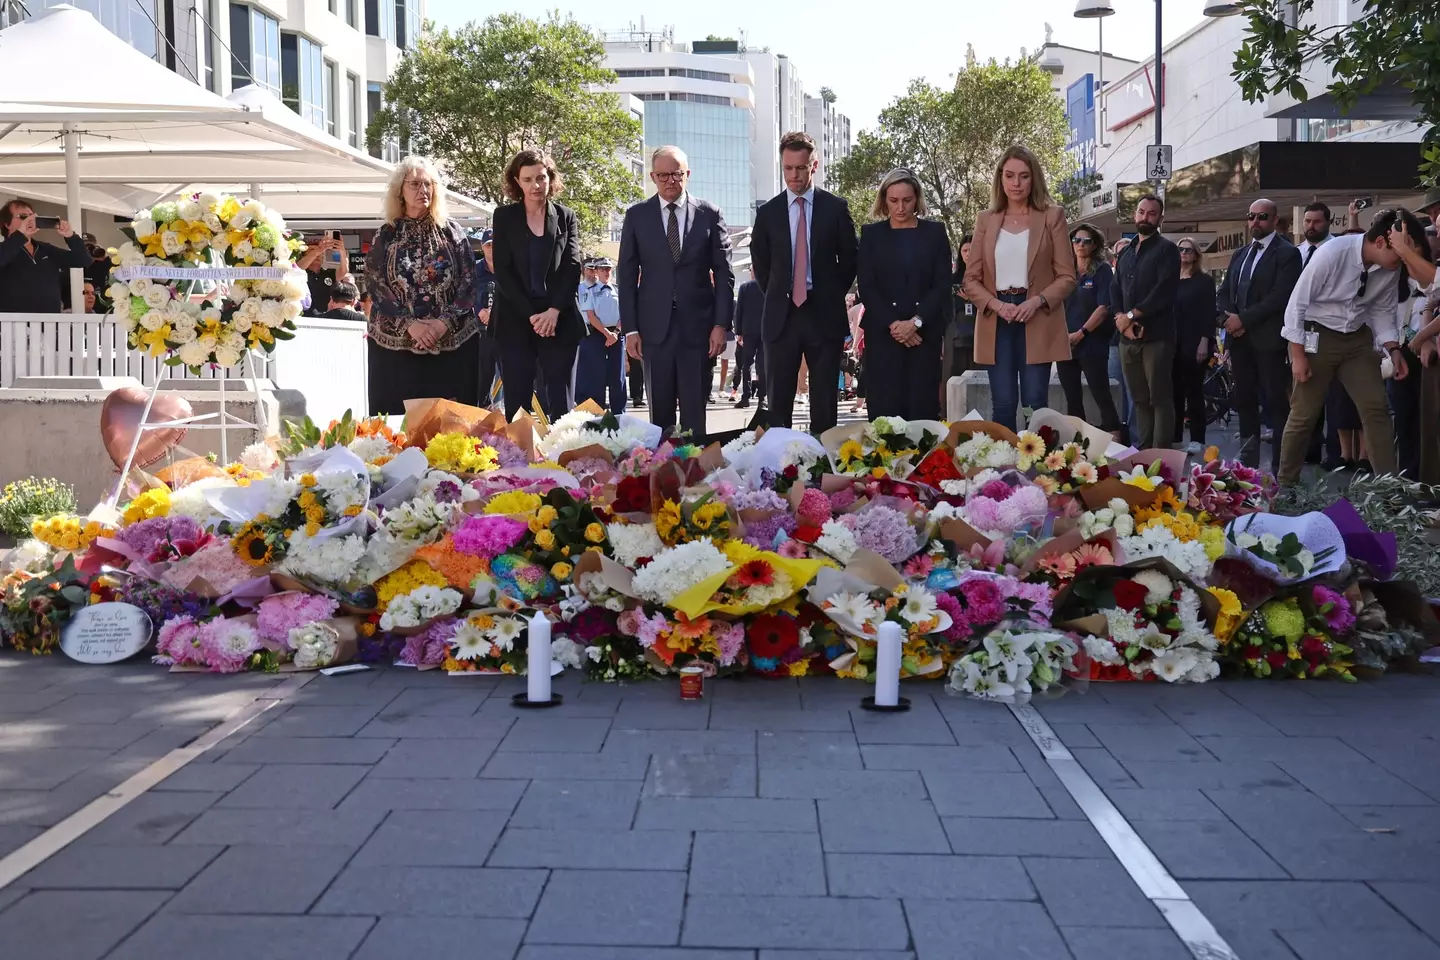 People are rushing to pay tribute to those lost in the attack (DAVID GRAY/AFP via Getty Images) 